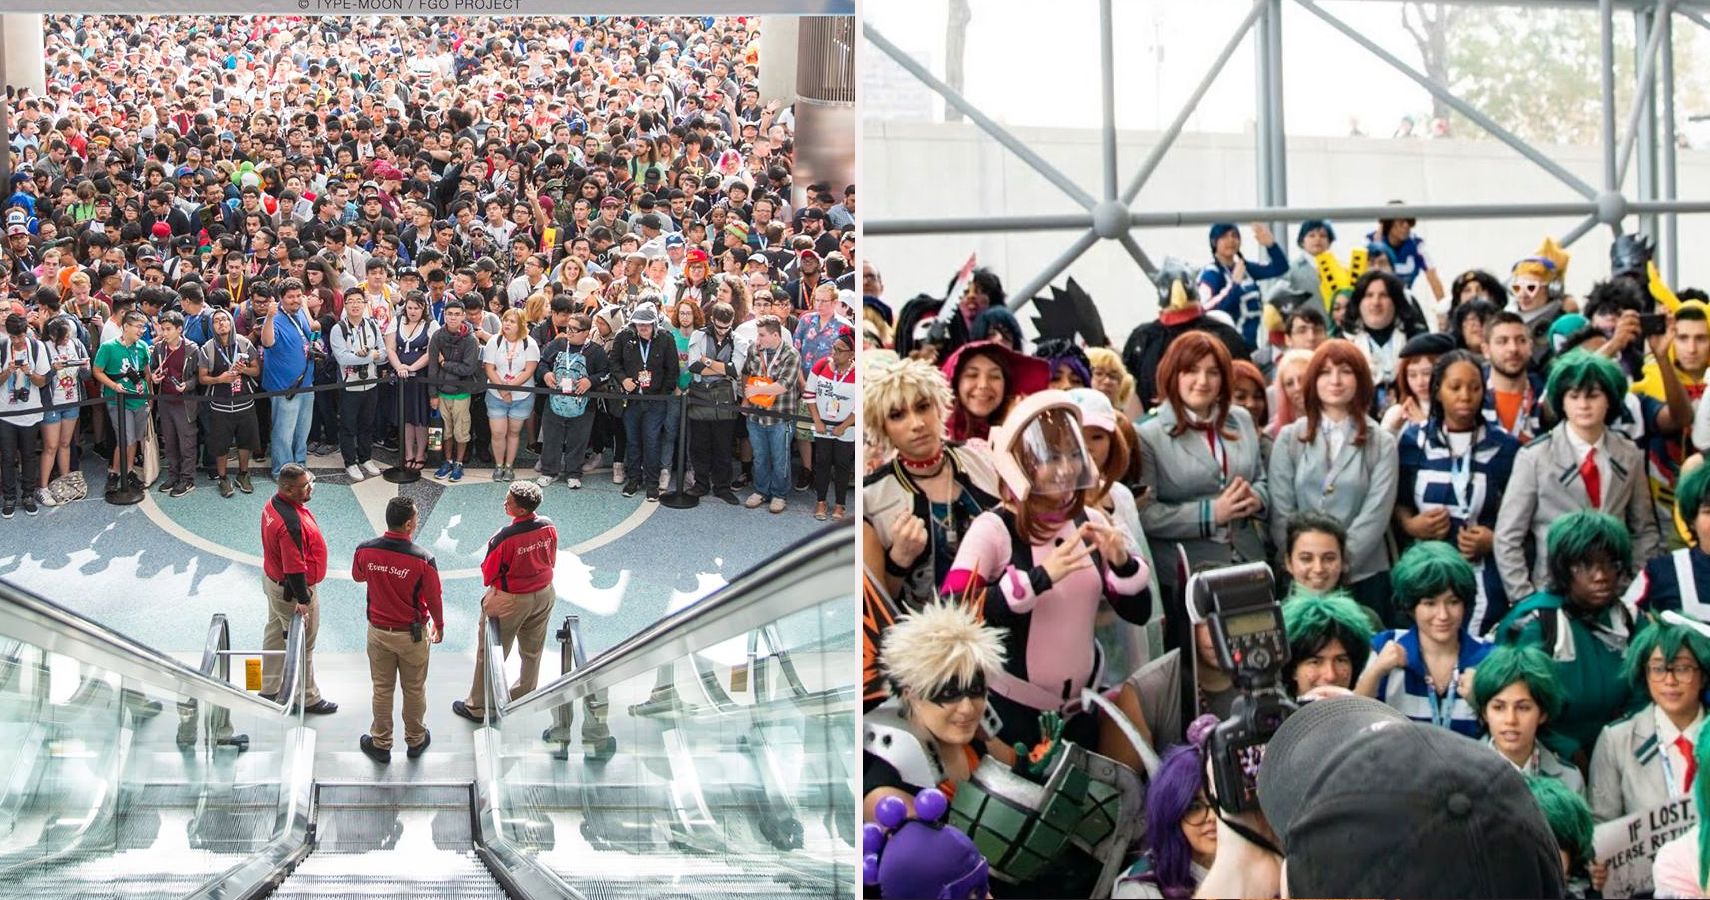 10 Essential Tips For Surviving Your First Anime Convention, Wherever It Is